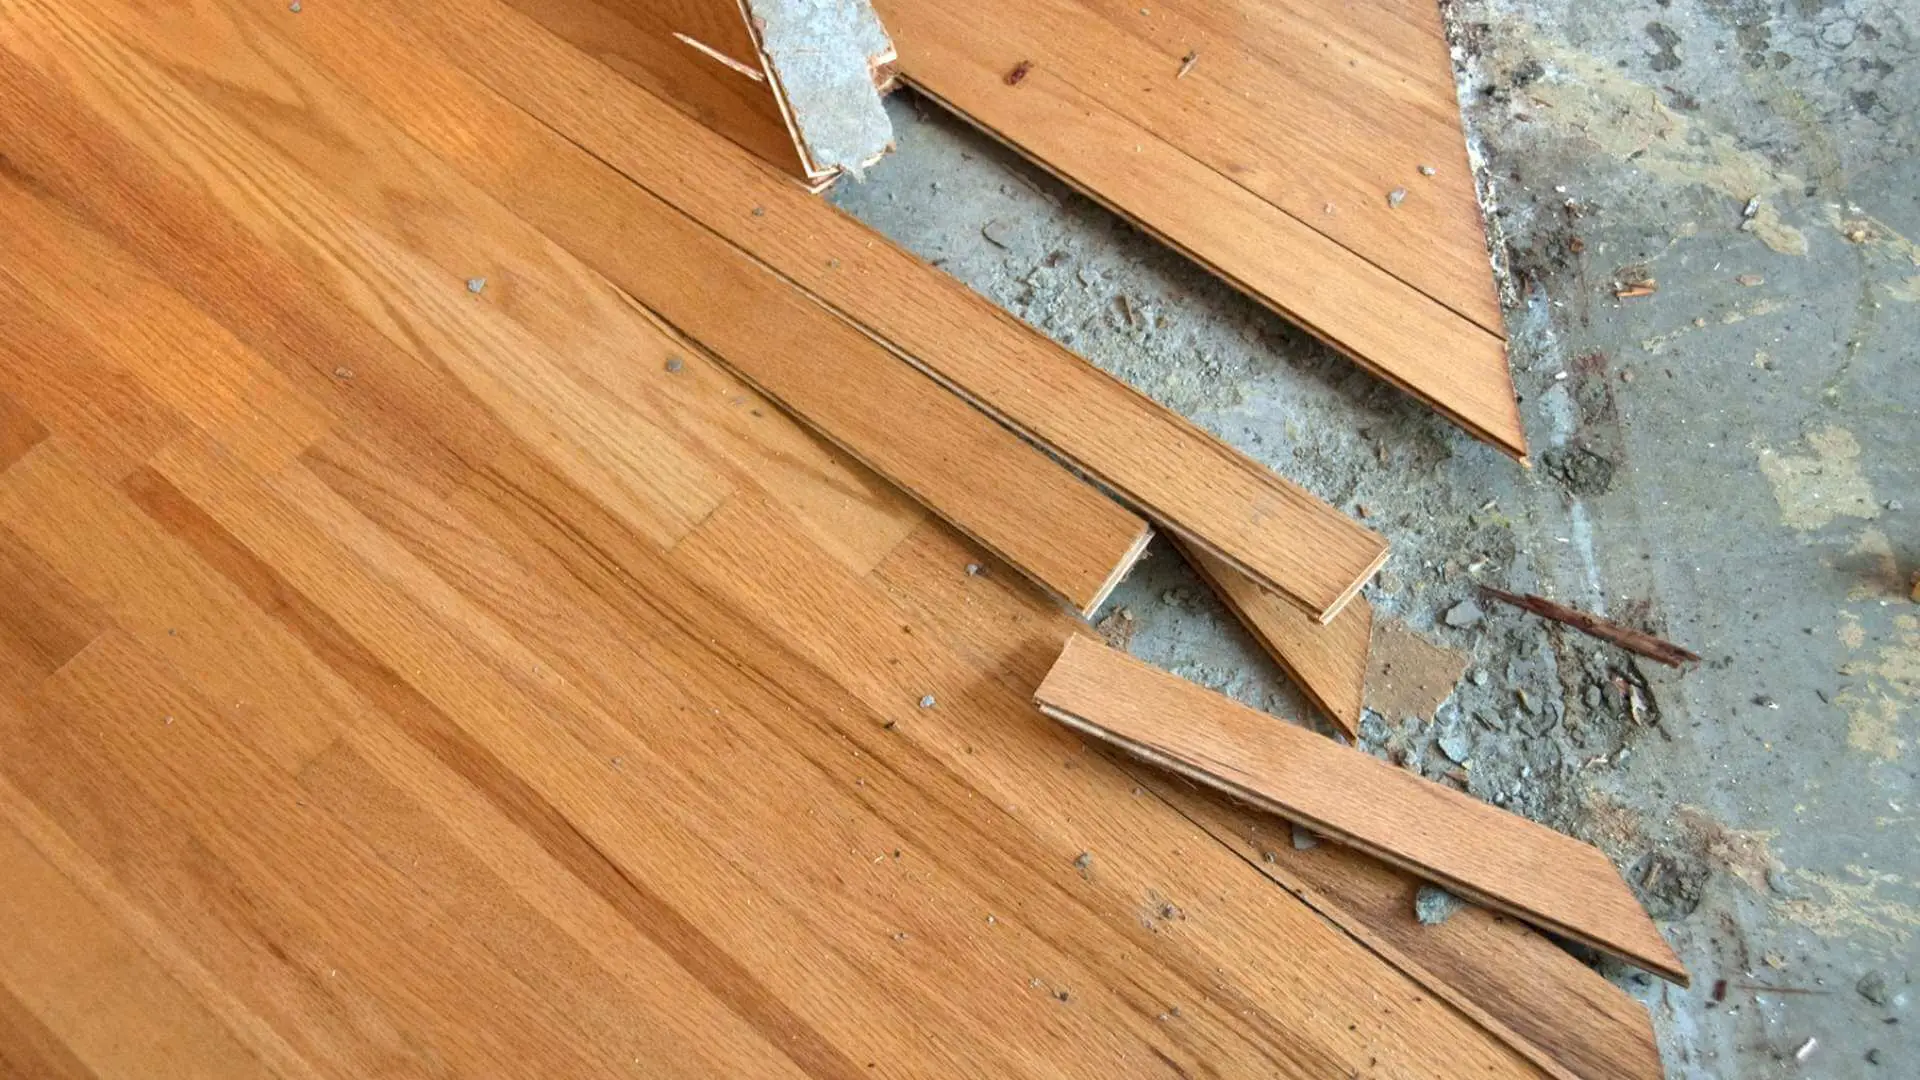 squeaky floors a structural problem